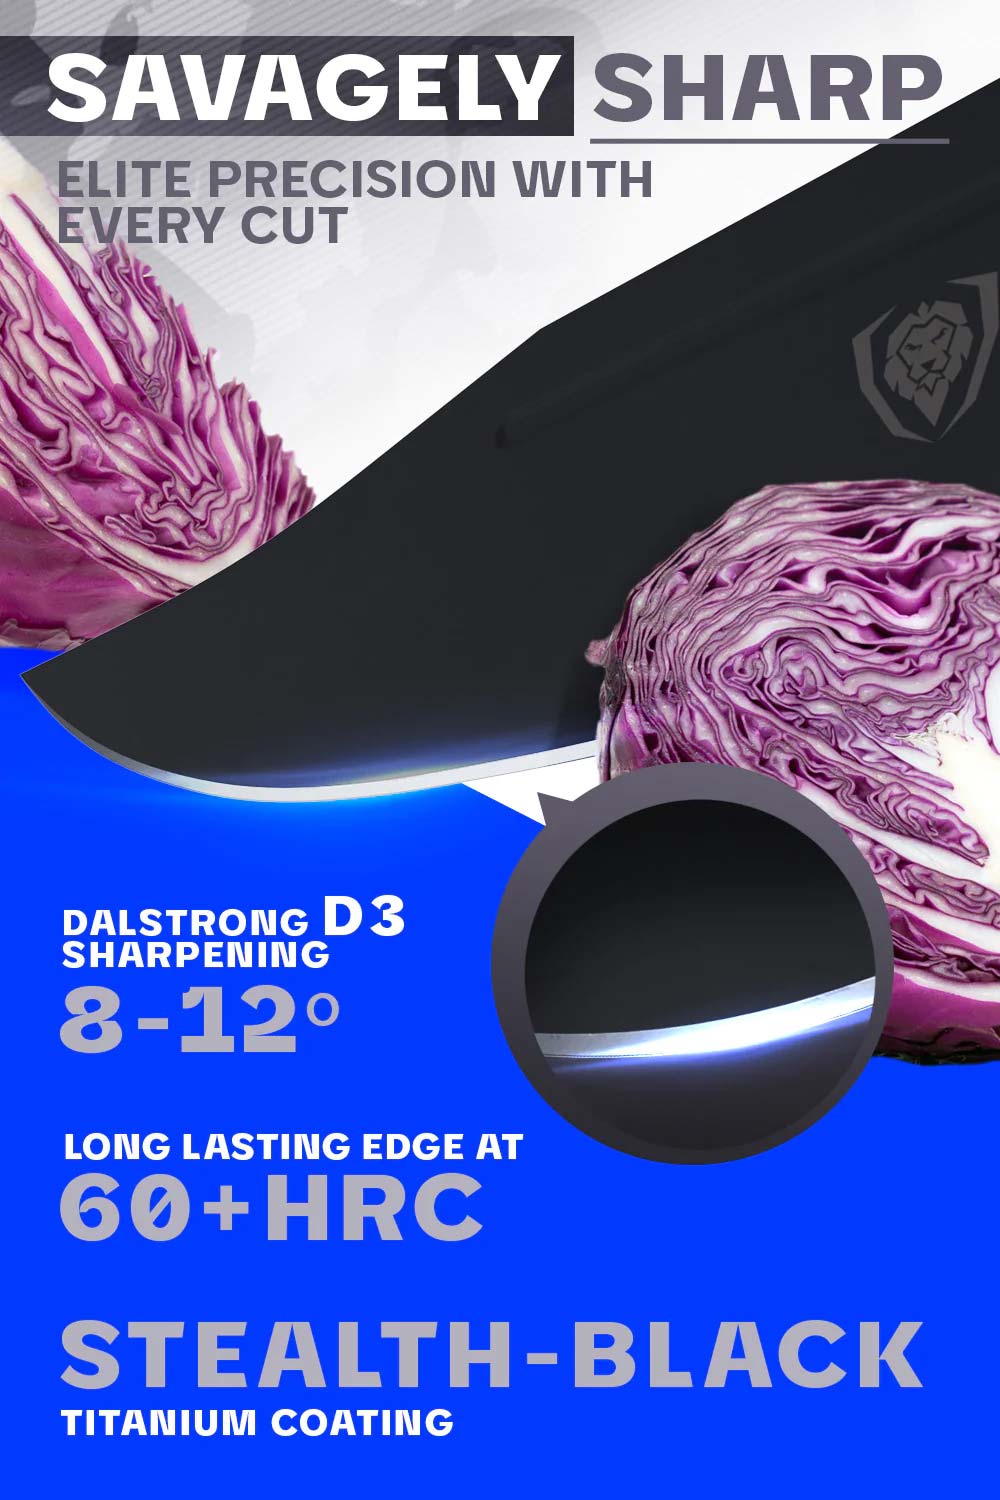 Dalstrong delta wolf series 8 inch chef knife featuring it's razor sharp black blade.